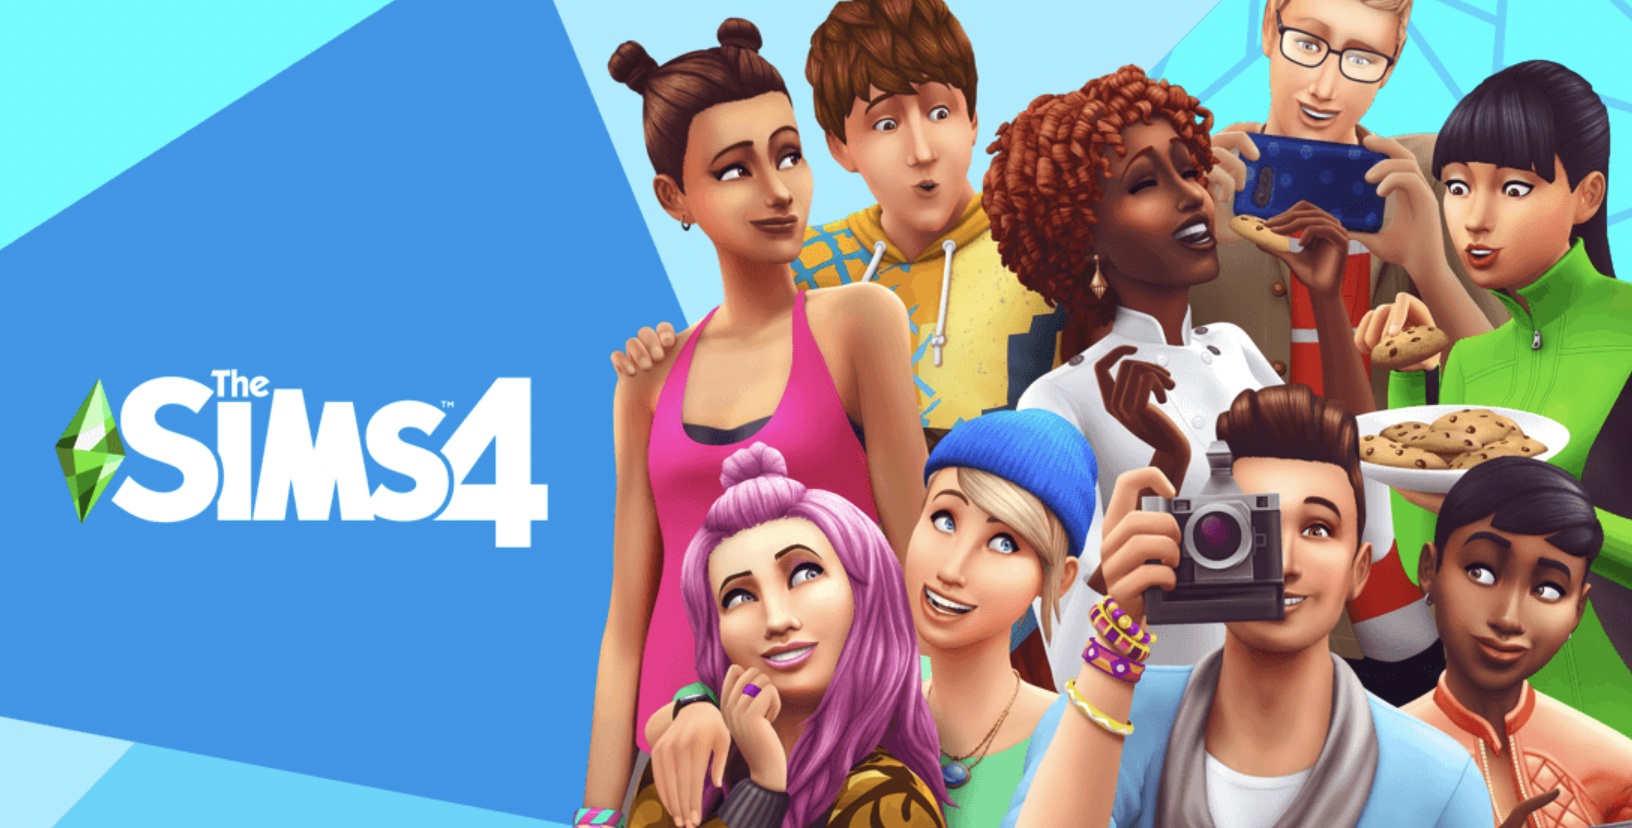 The Sims 4 Update 1.35 Patch Notes